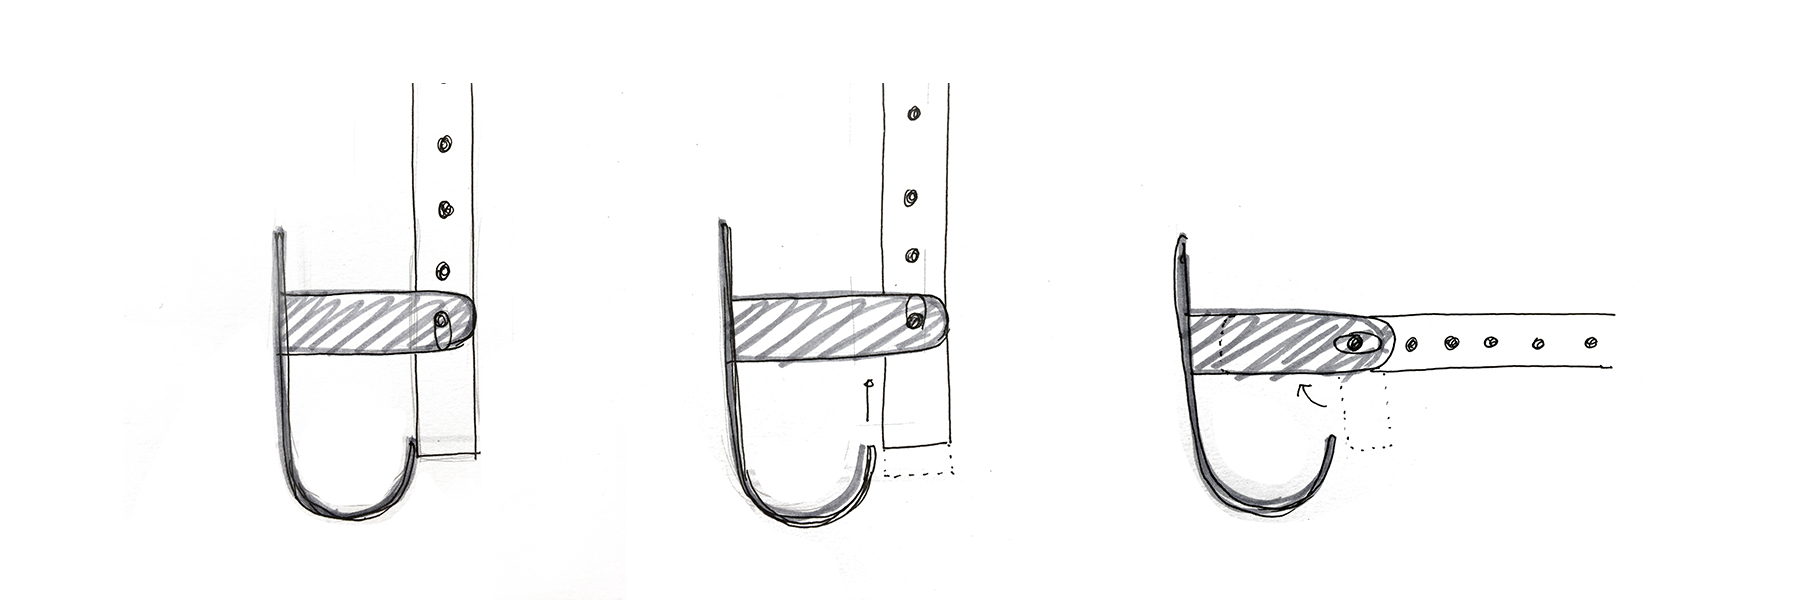 MUSE Design Winners - Artist's Clothes Airer